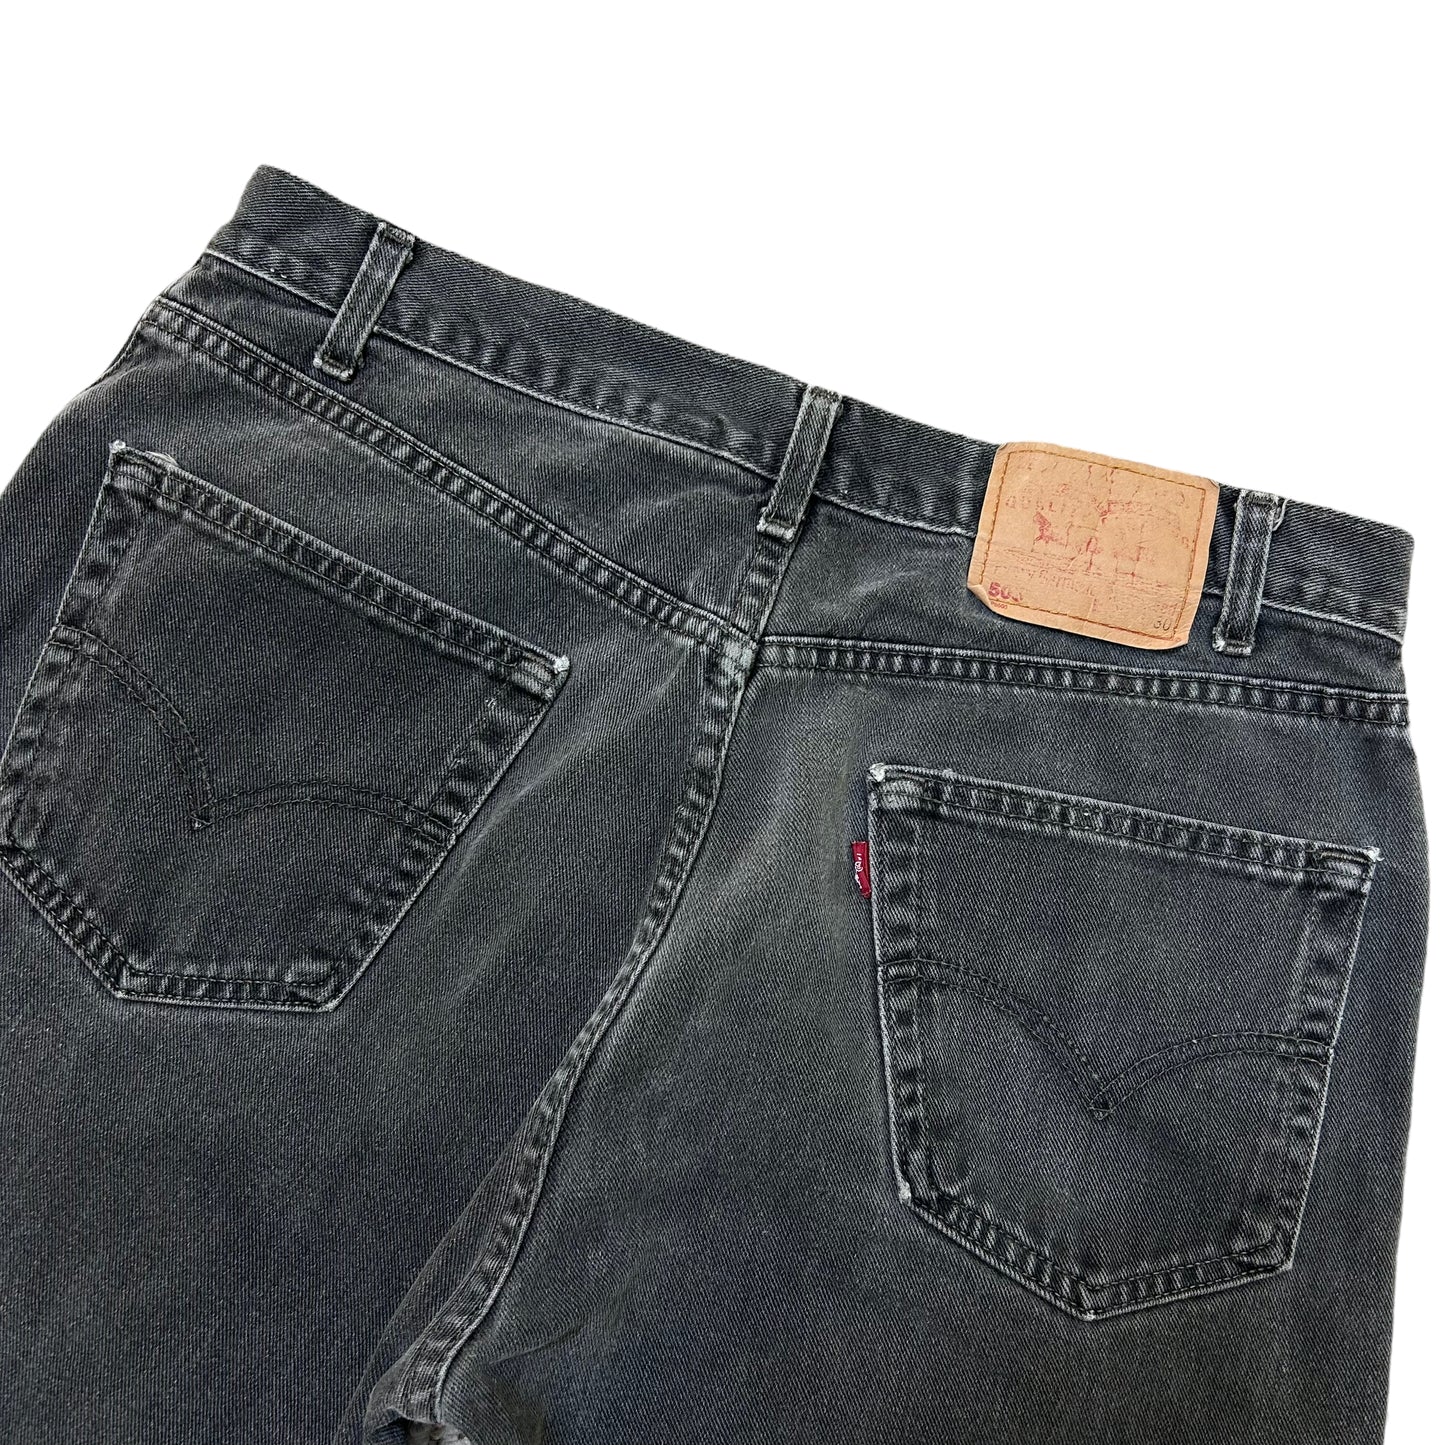 Modern Late 2000s Levi’s 505 Regular Fit Charcoal Grey Jeans - Size 36” x 30”